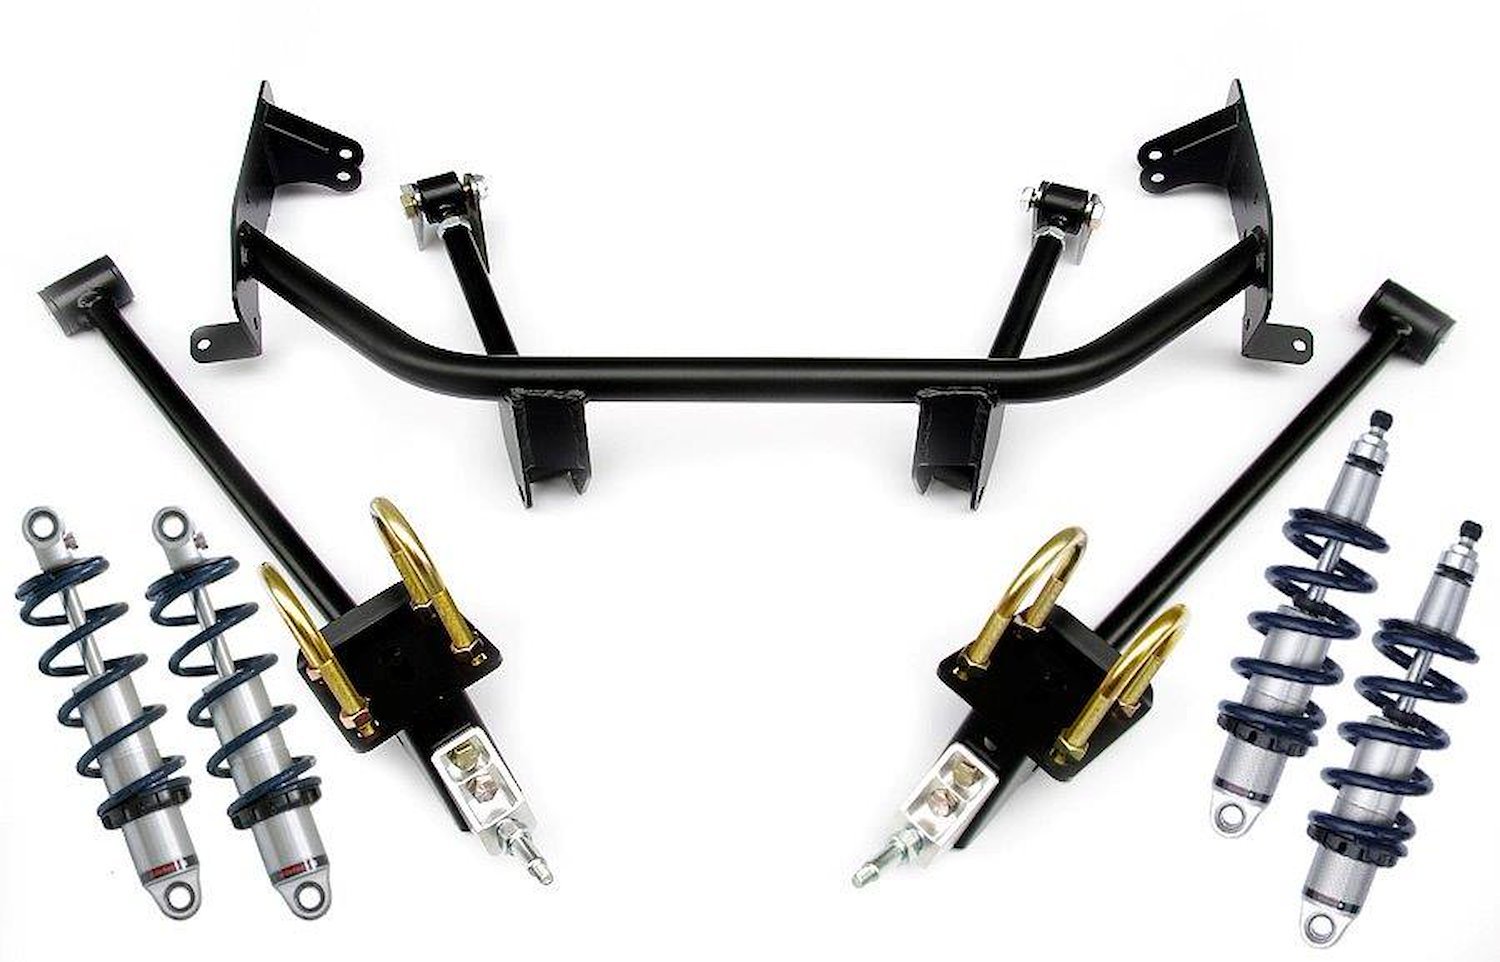 Level 2 CoilOver System for 60-64 Galaxie. Includes front and rear HQ Series CoilOvers and Bolt-On 4 Link.